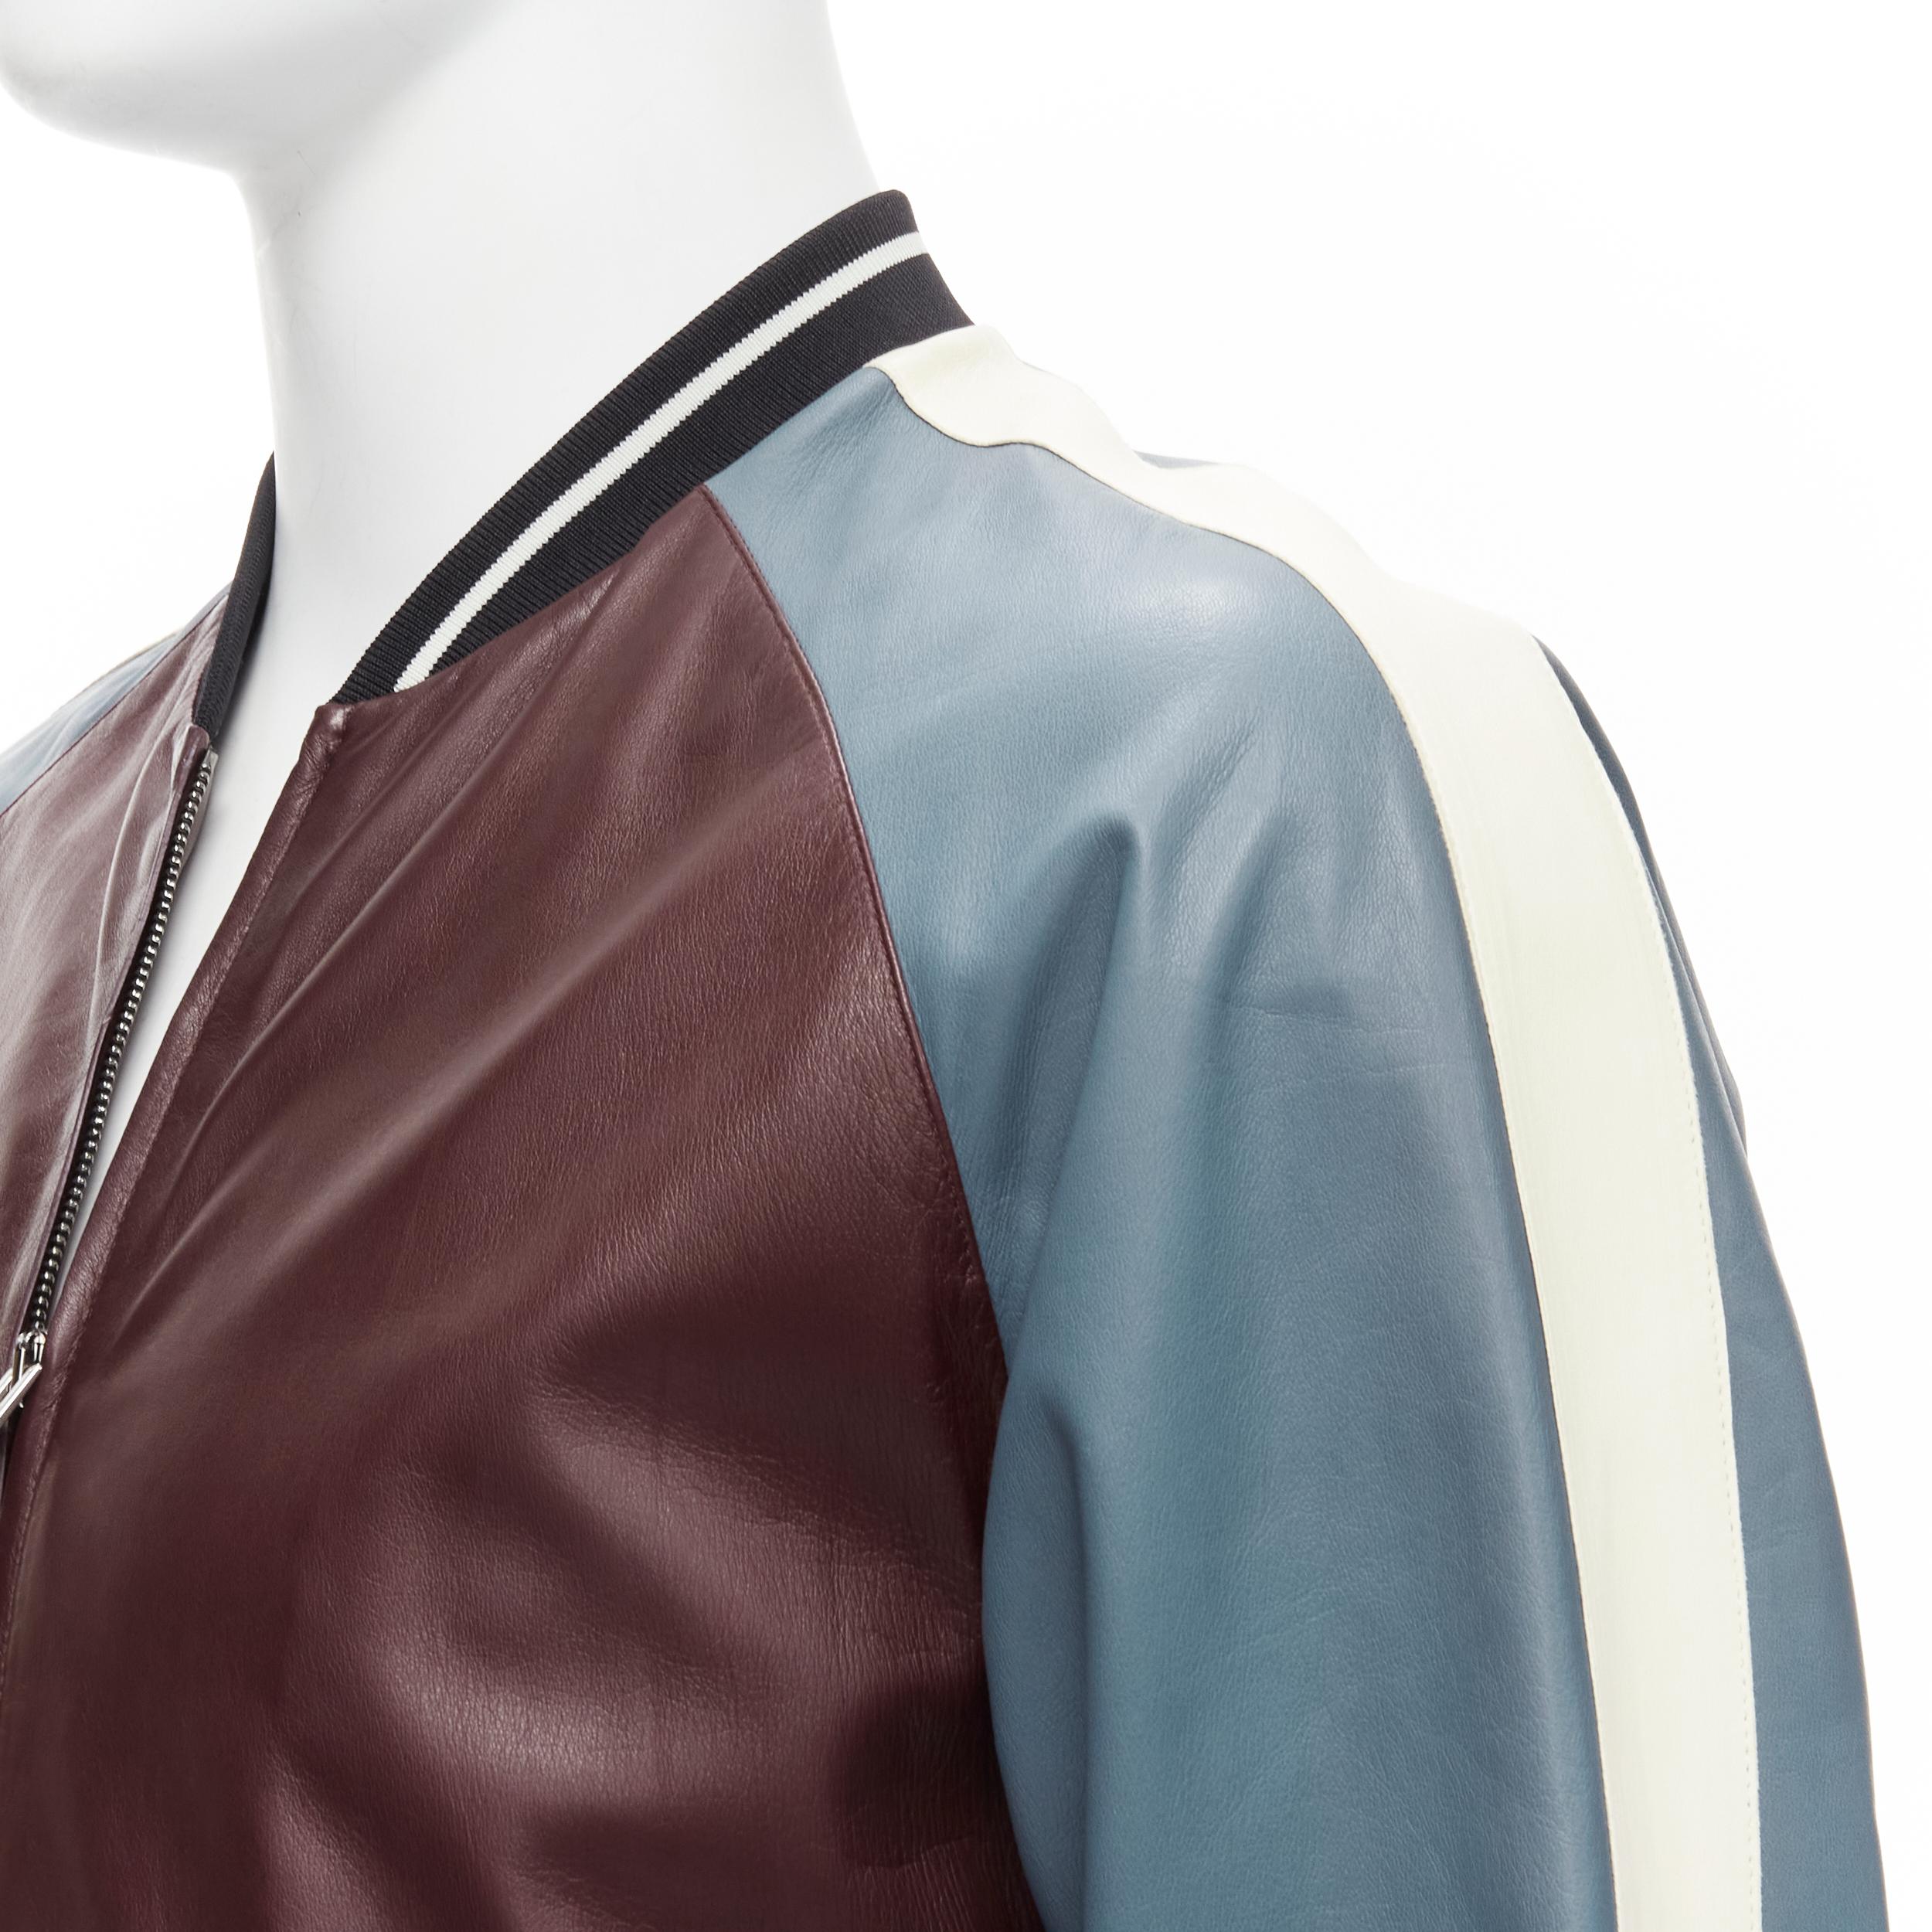 VALENTINO burgundy blue colorblock lambskin leather classic bomber FR48 M

Reference: YNWG/A00085

Brand: Valentino

Designer: Pier Paolo Piccioli

Material: Lambskin Leather

Color: Burgundy, Blue

Pattern: Solid

Closure: Zip

Lining: